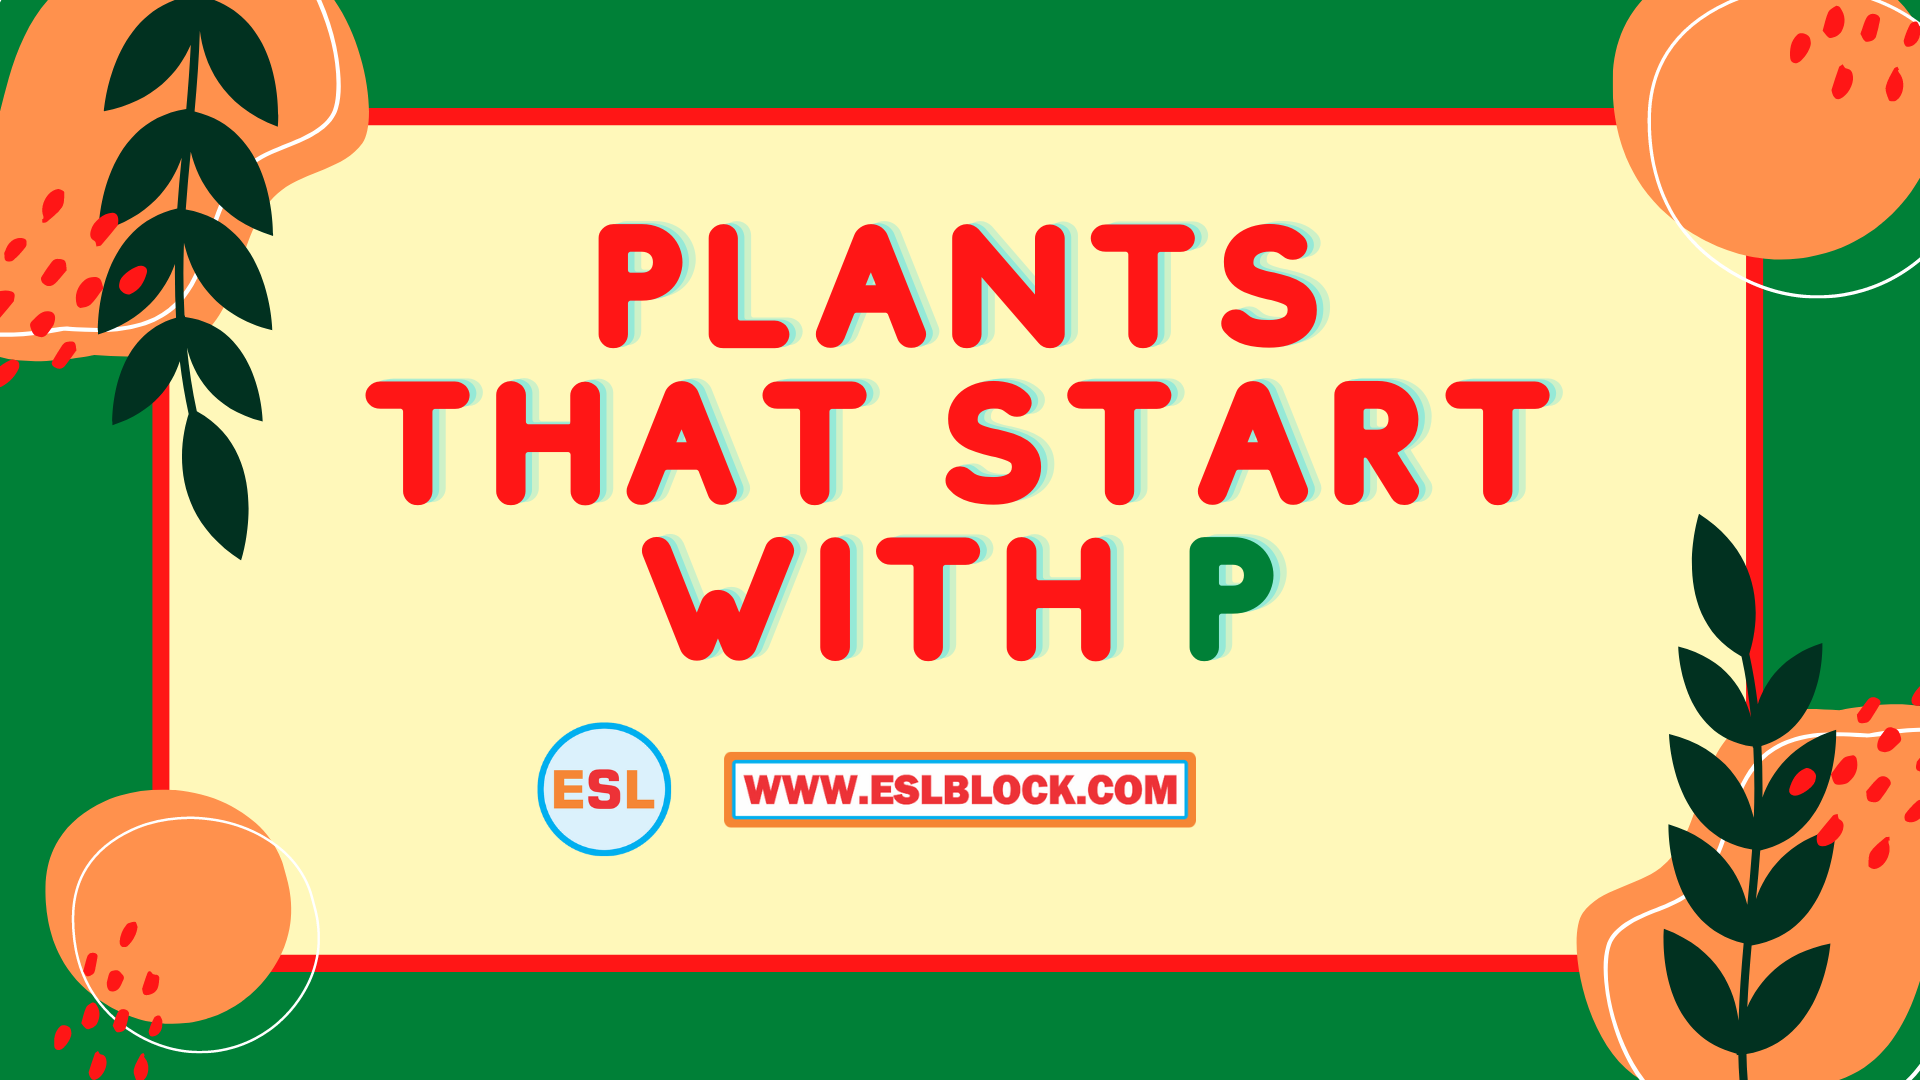 4 Letter Plants, 5 Letter Plants Starting With P, English, English Grammar, English Vocabulary, English Words, List of Plants That Start With P, P Plants, P Plants in English, P Plants Names, Plants List, Plants Names, Plants That Start With P, Vocabulary, Words That Start With P